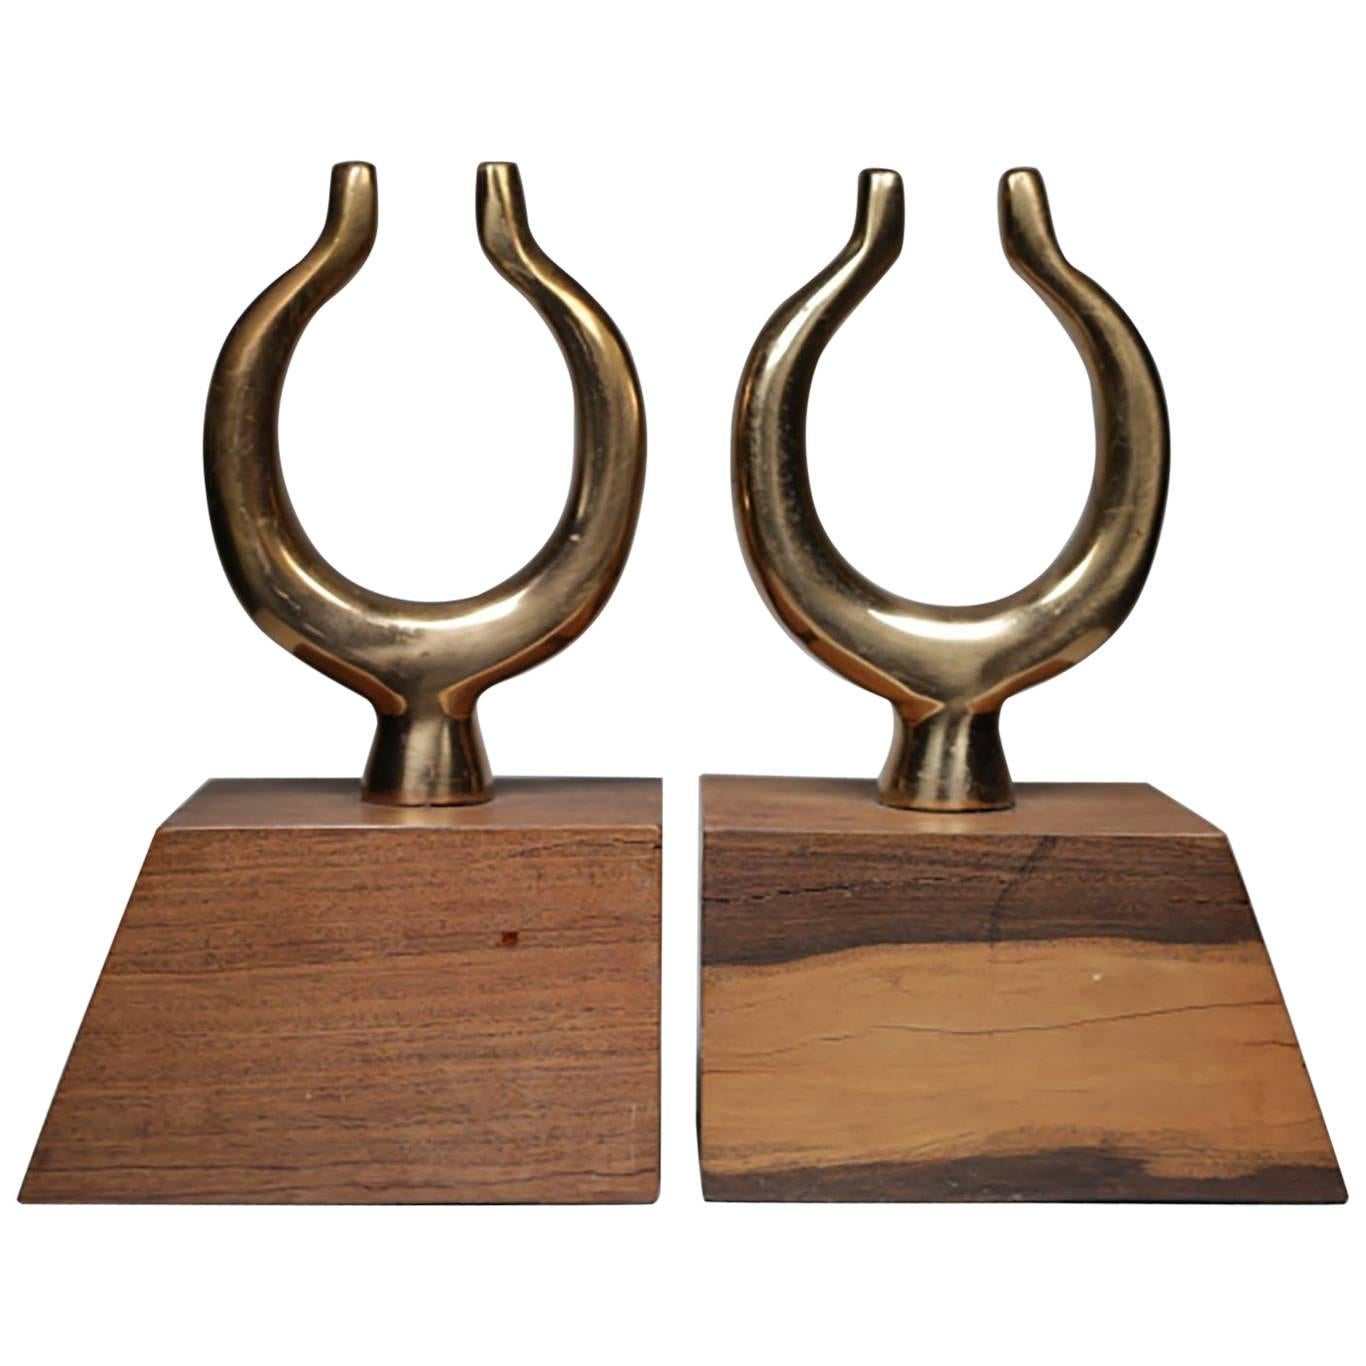 Pair of Large Bookends, 19th Century Solid Brass Oar Locks Mounted on MCM Base